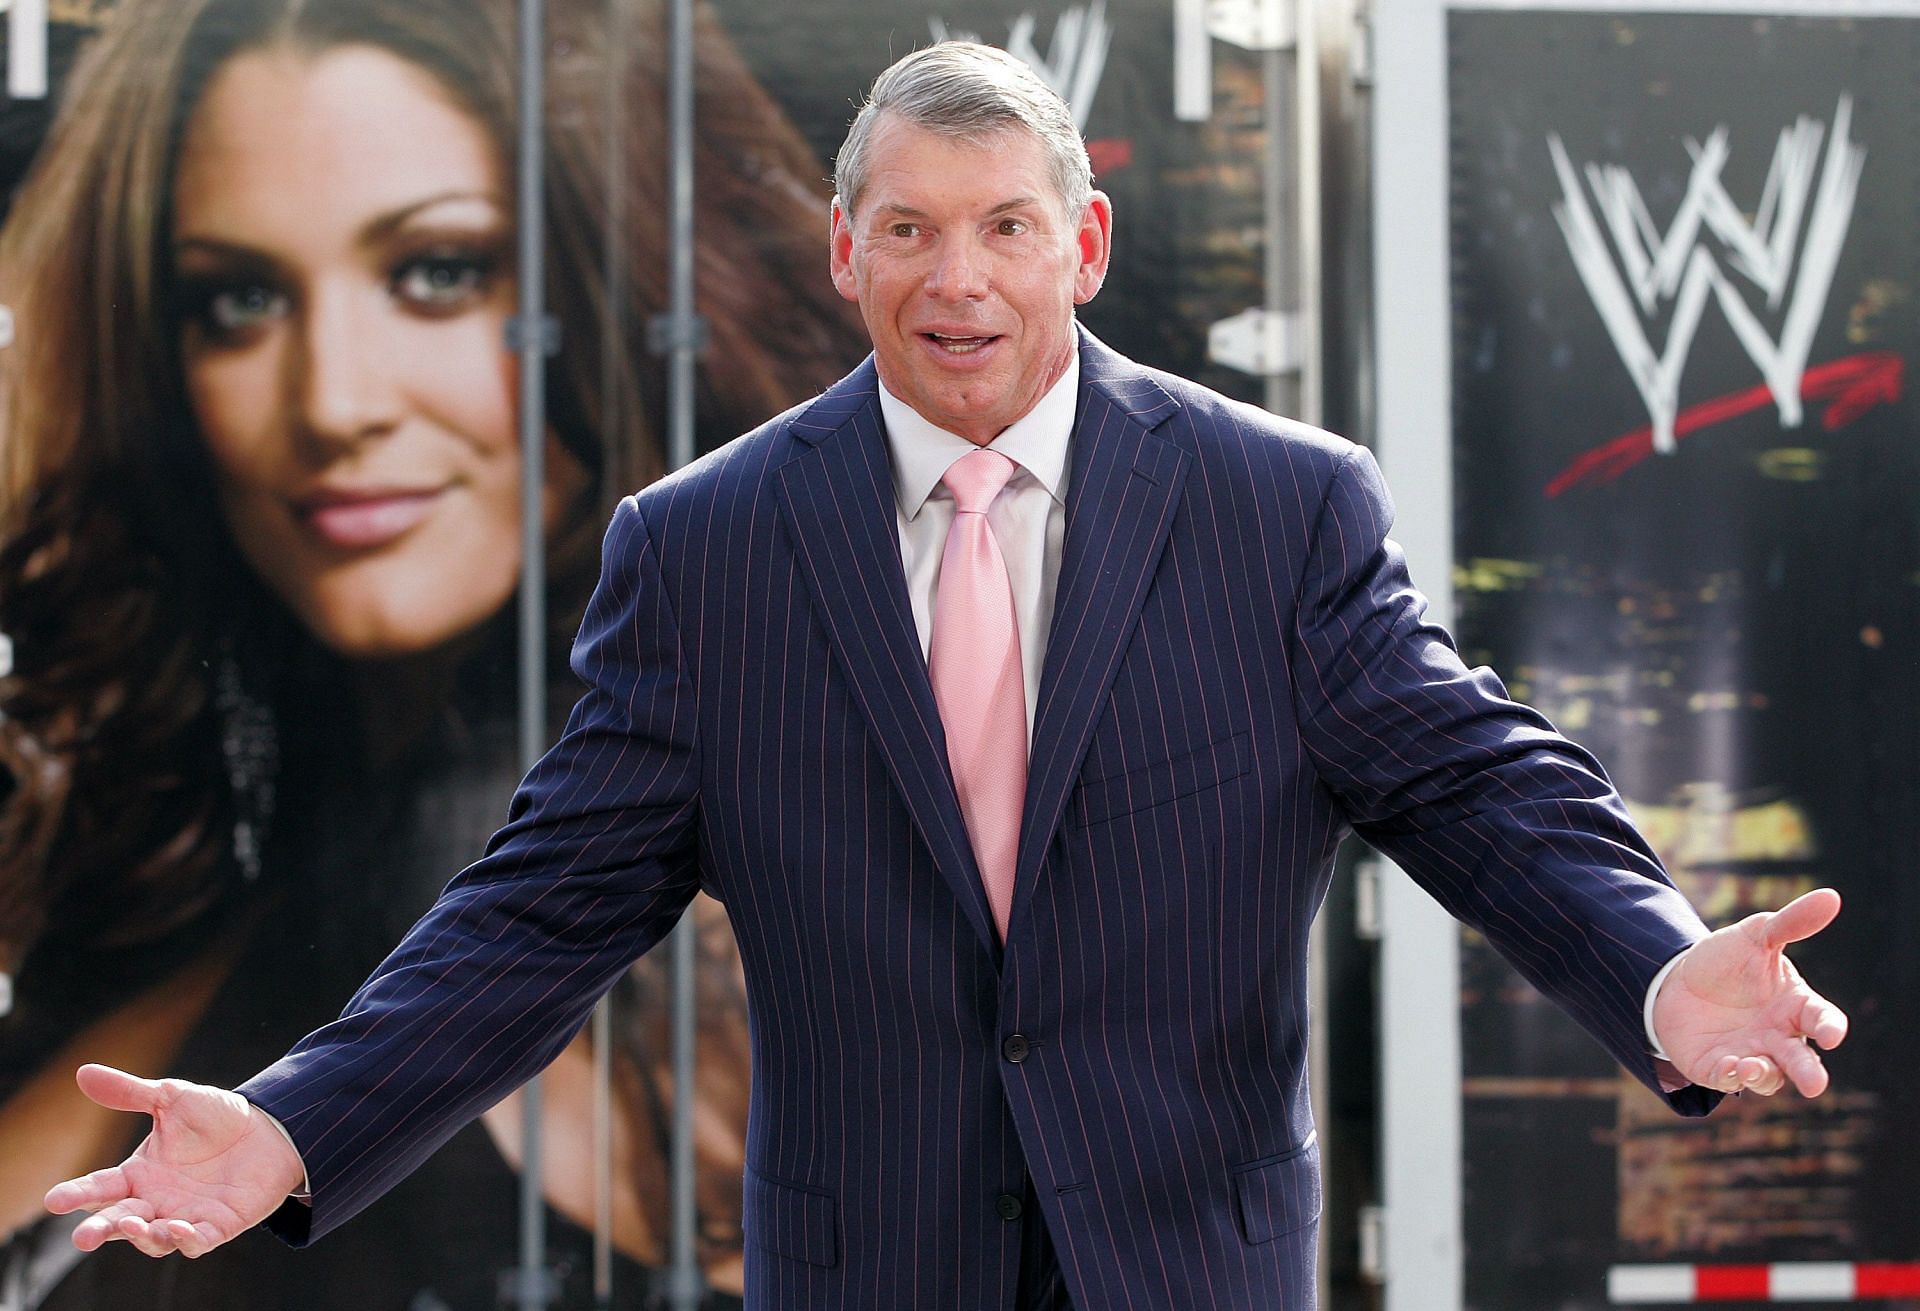 Which faction does Vince want to back together?